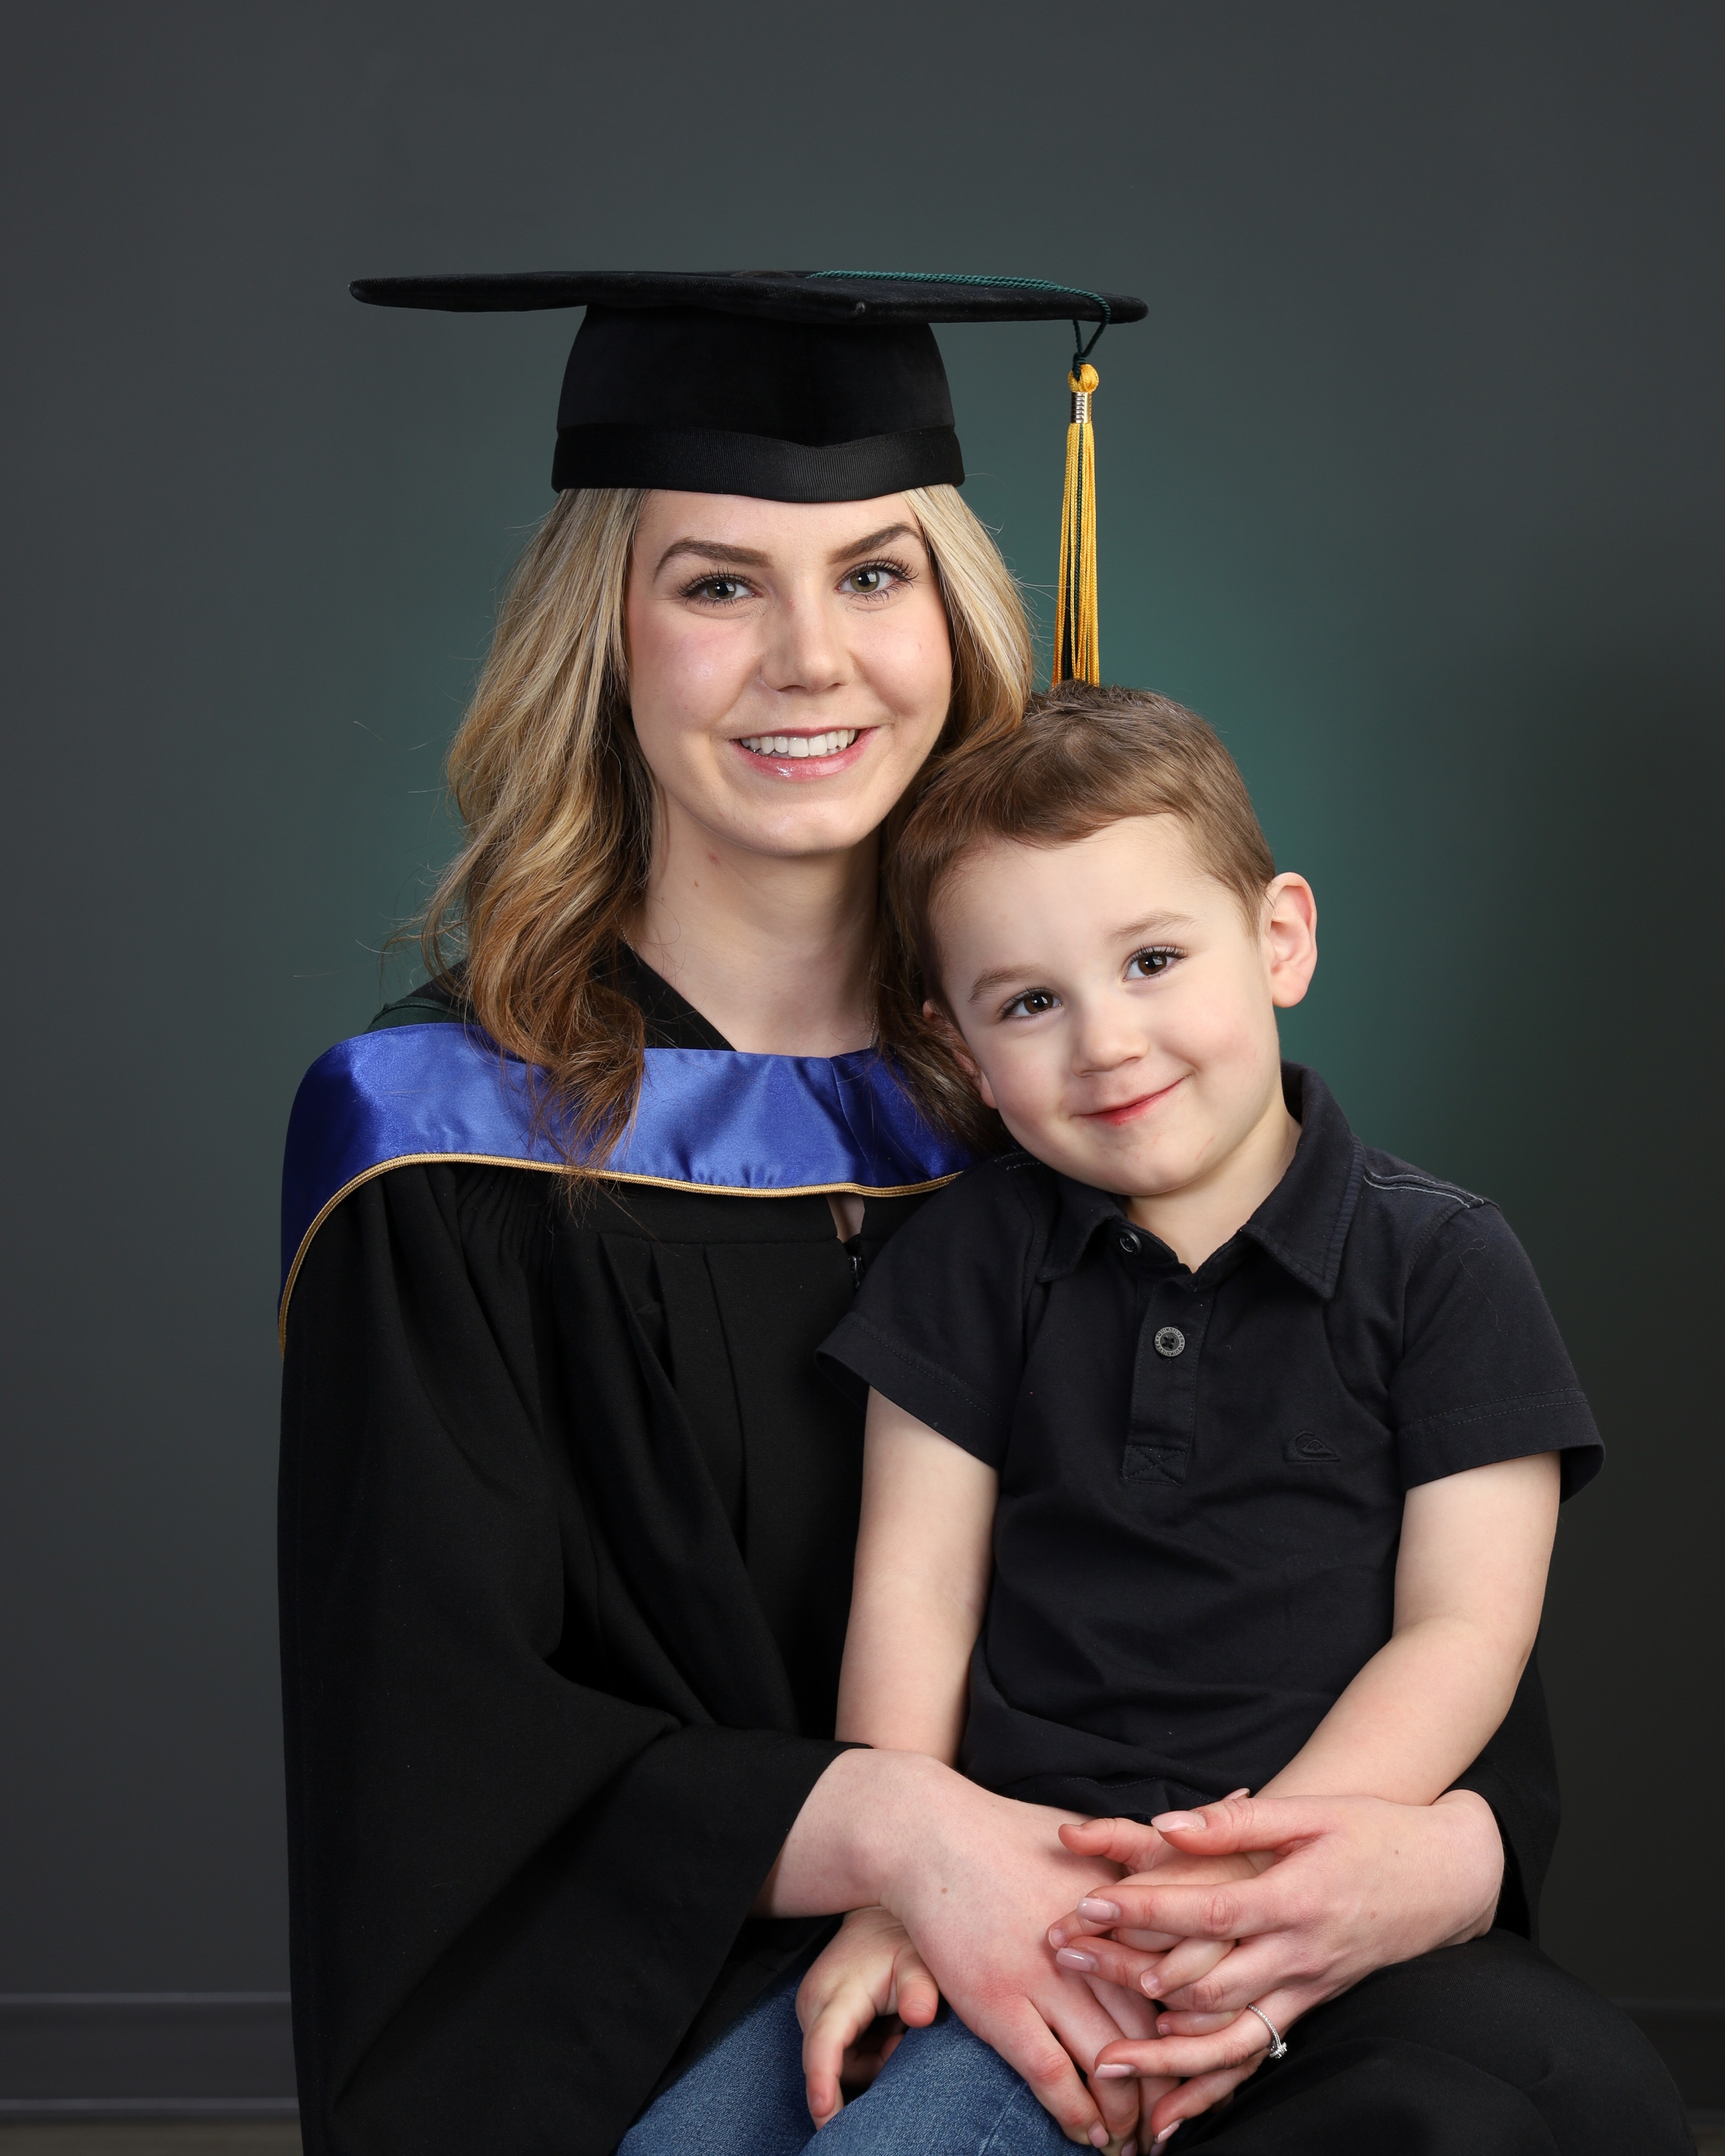 blond woman in cap and gown poses for photo with young son in a black shirt on her lap